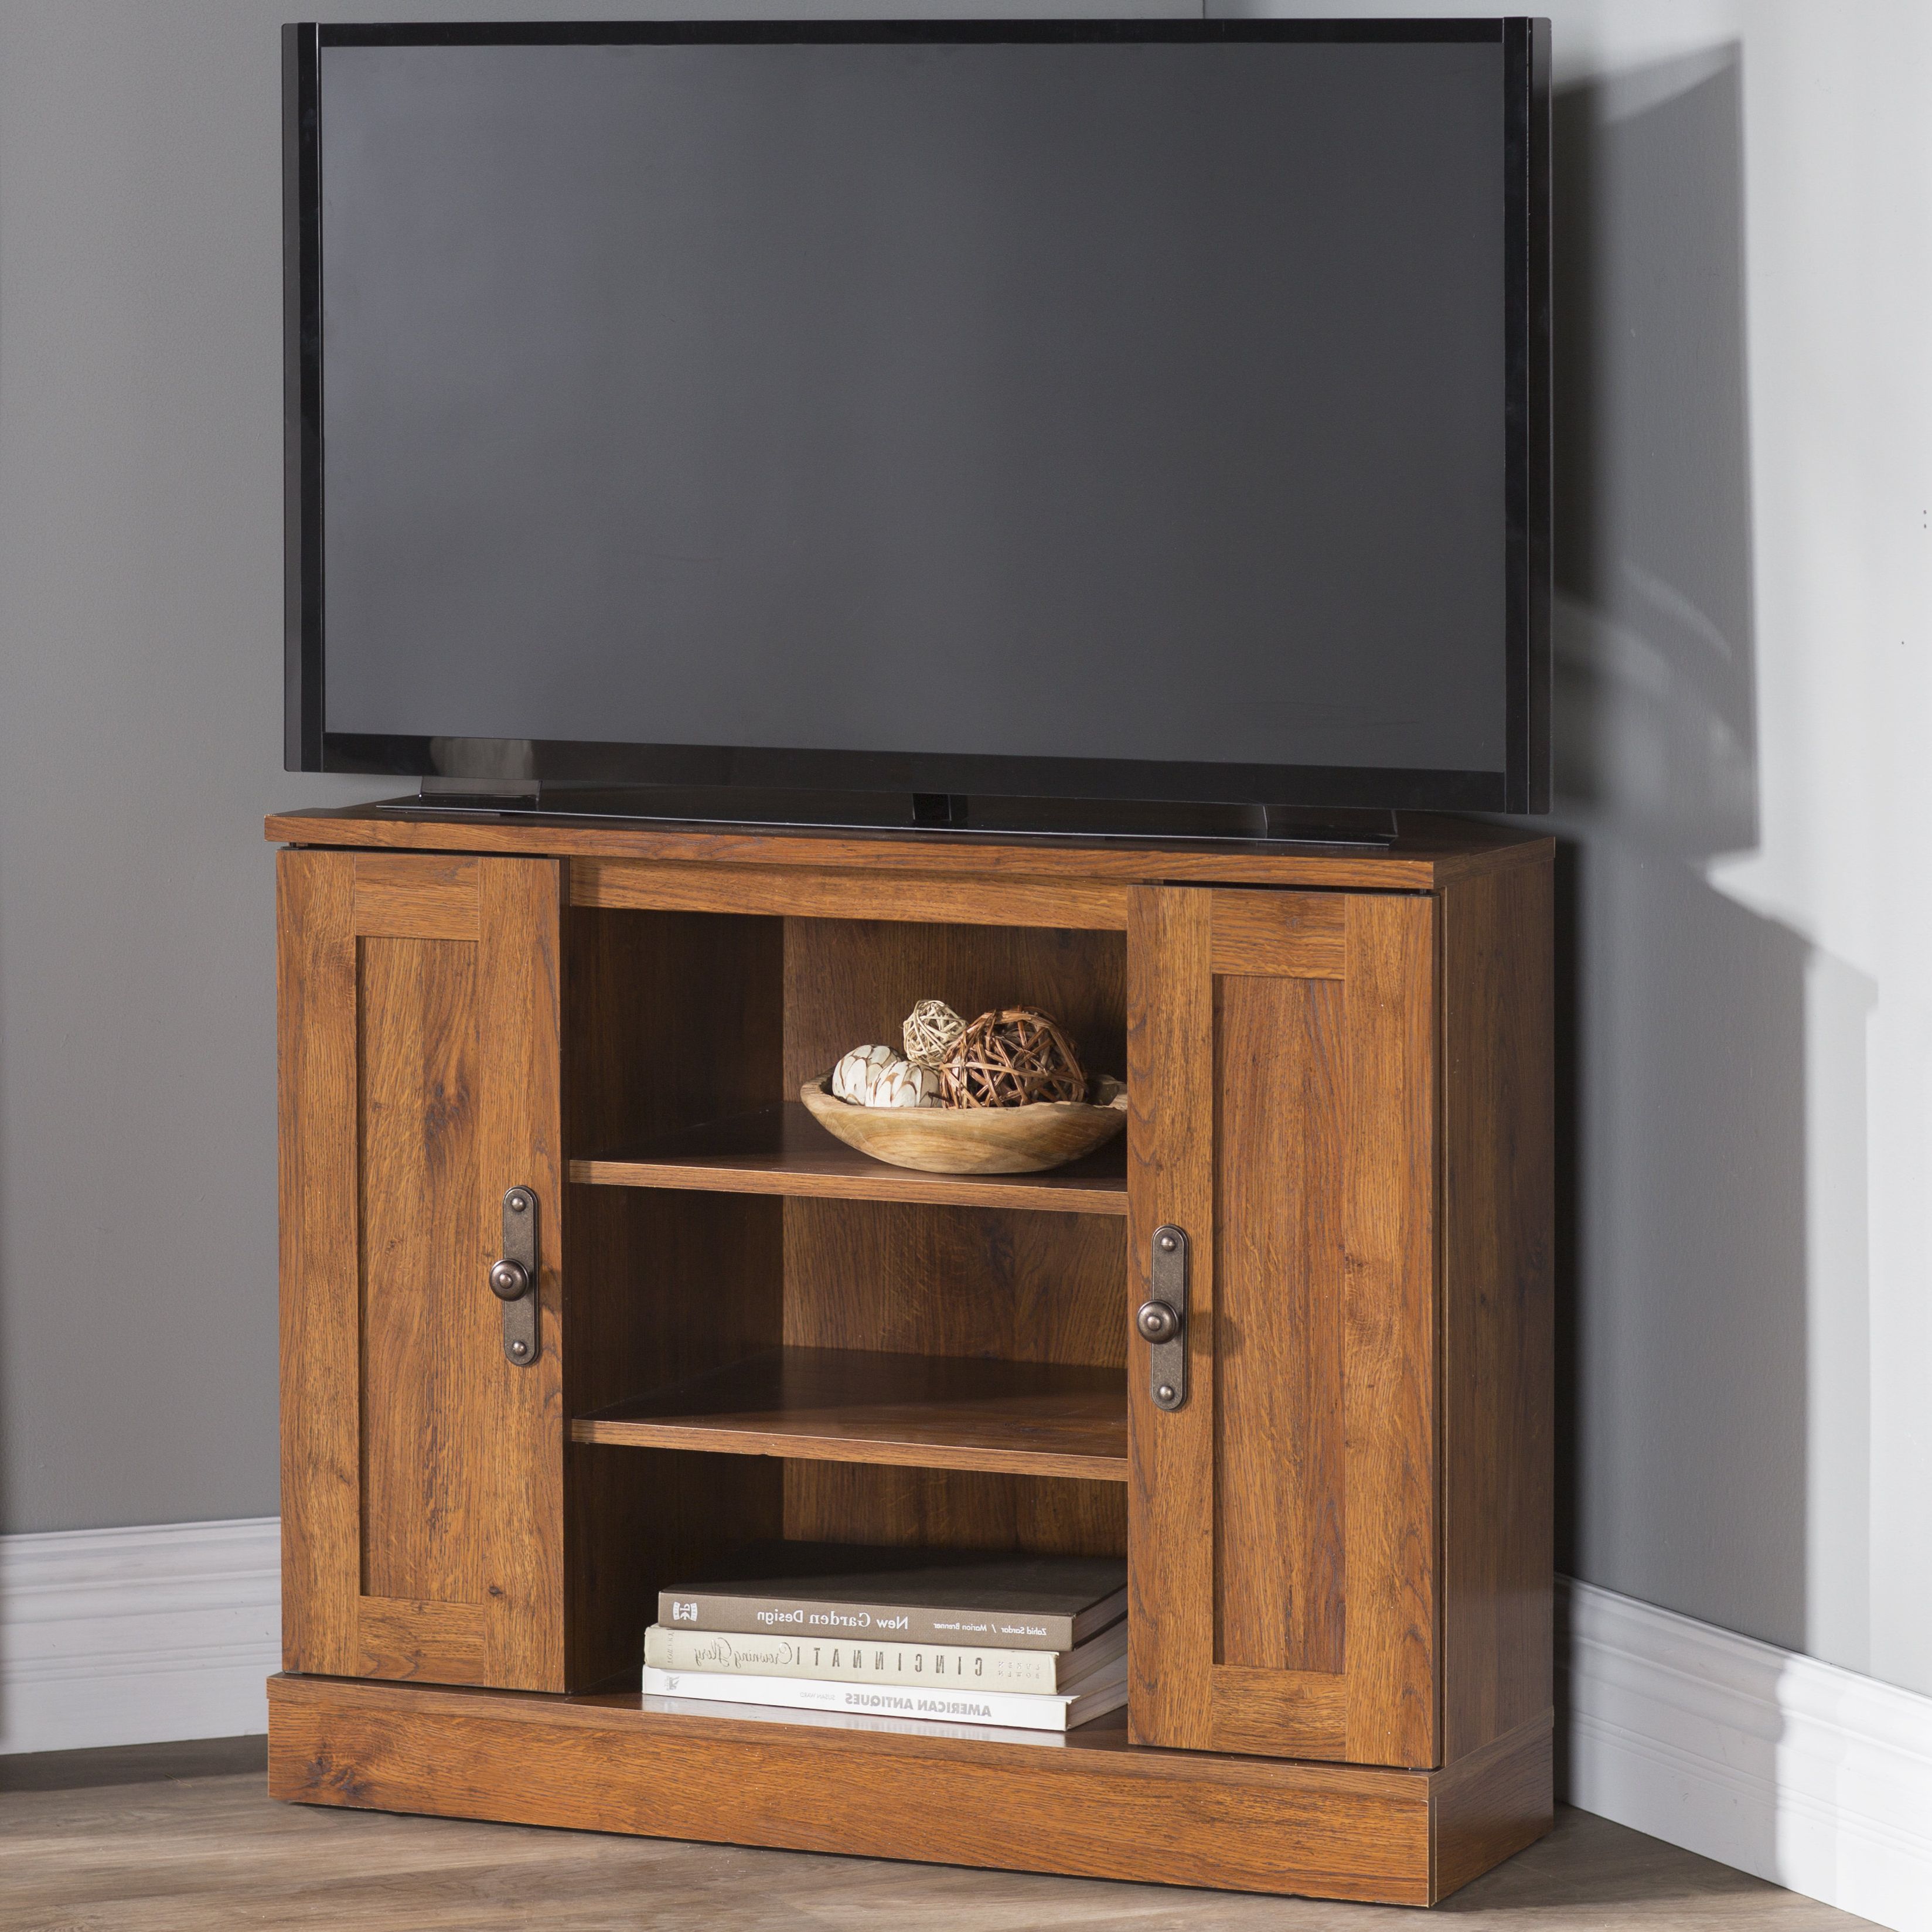 Wooden Corner Tv Stands Within 2017 Corner Tv Stands You'll Love (View 15 of 20)